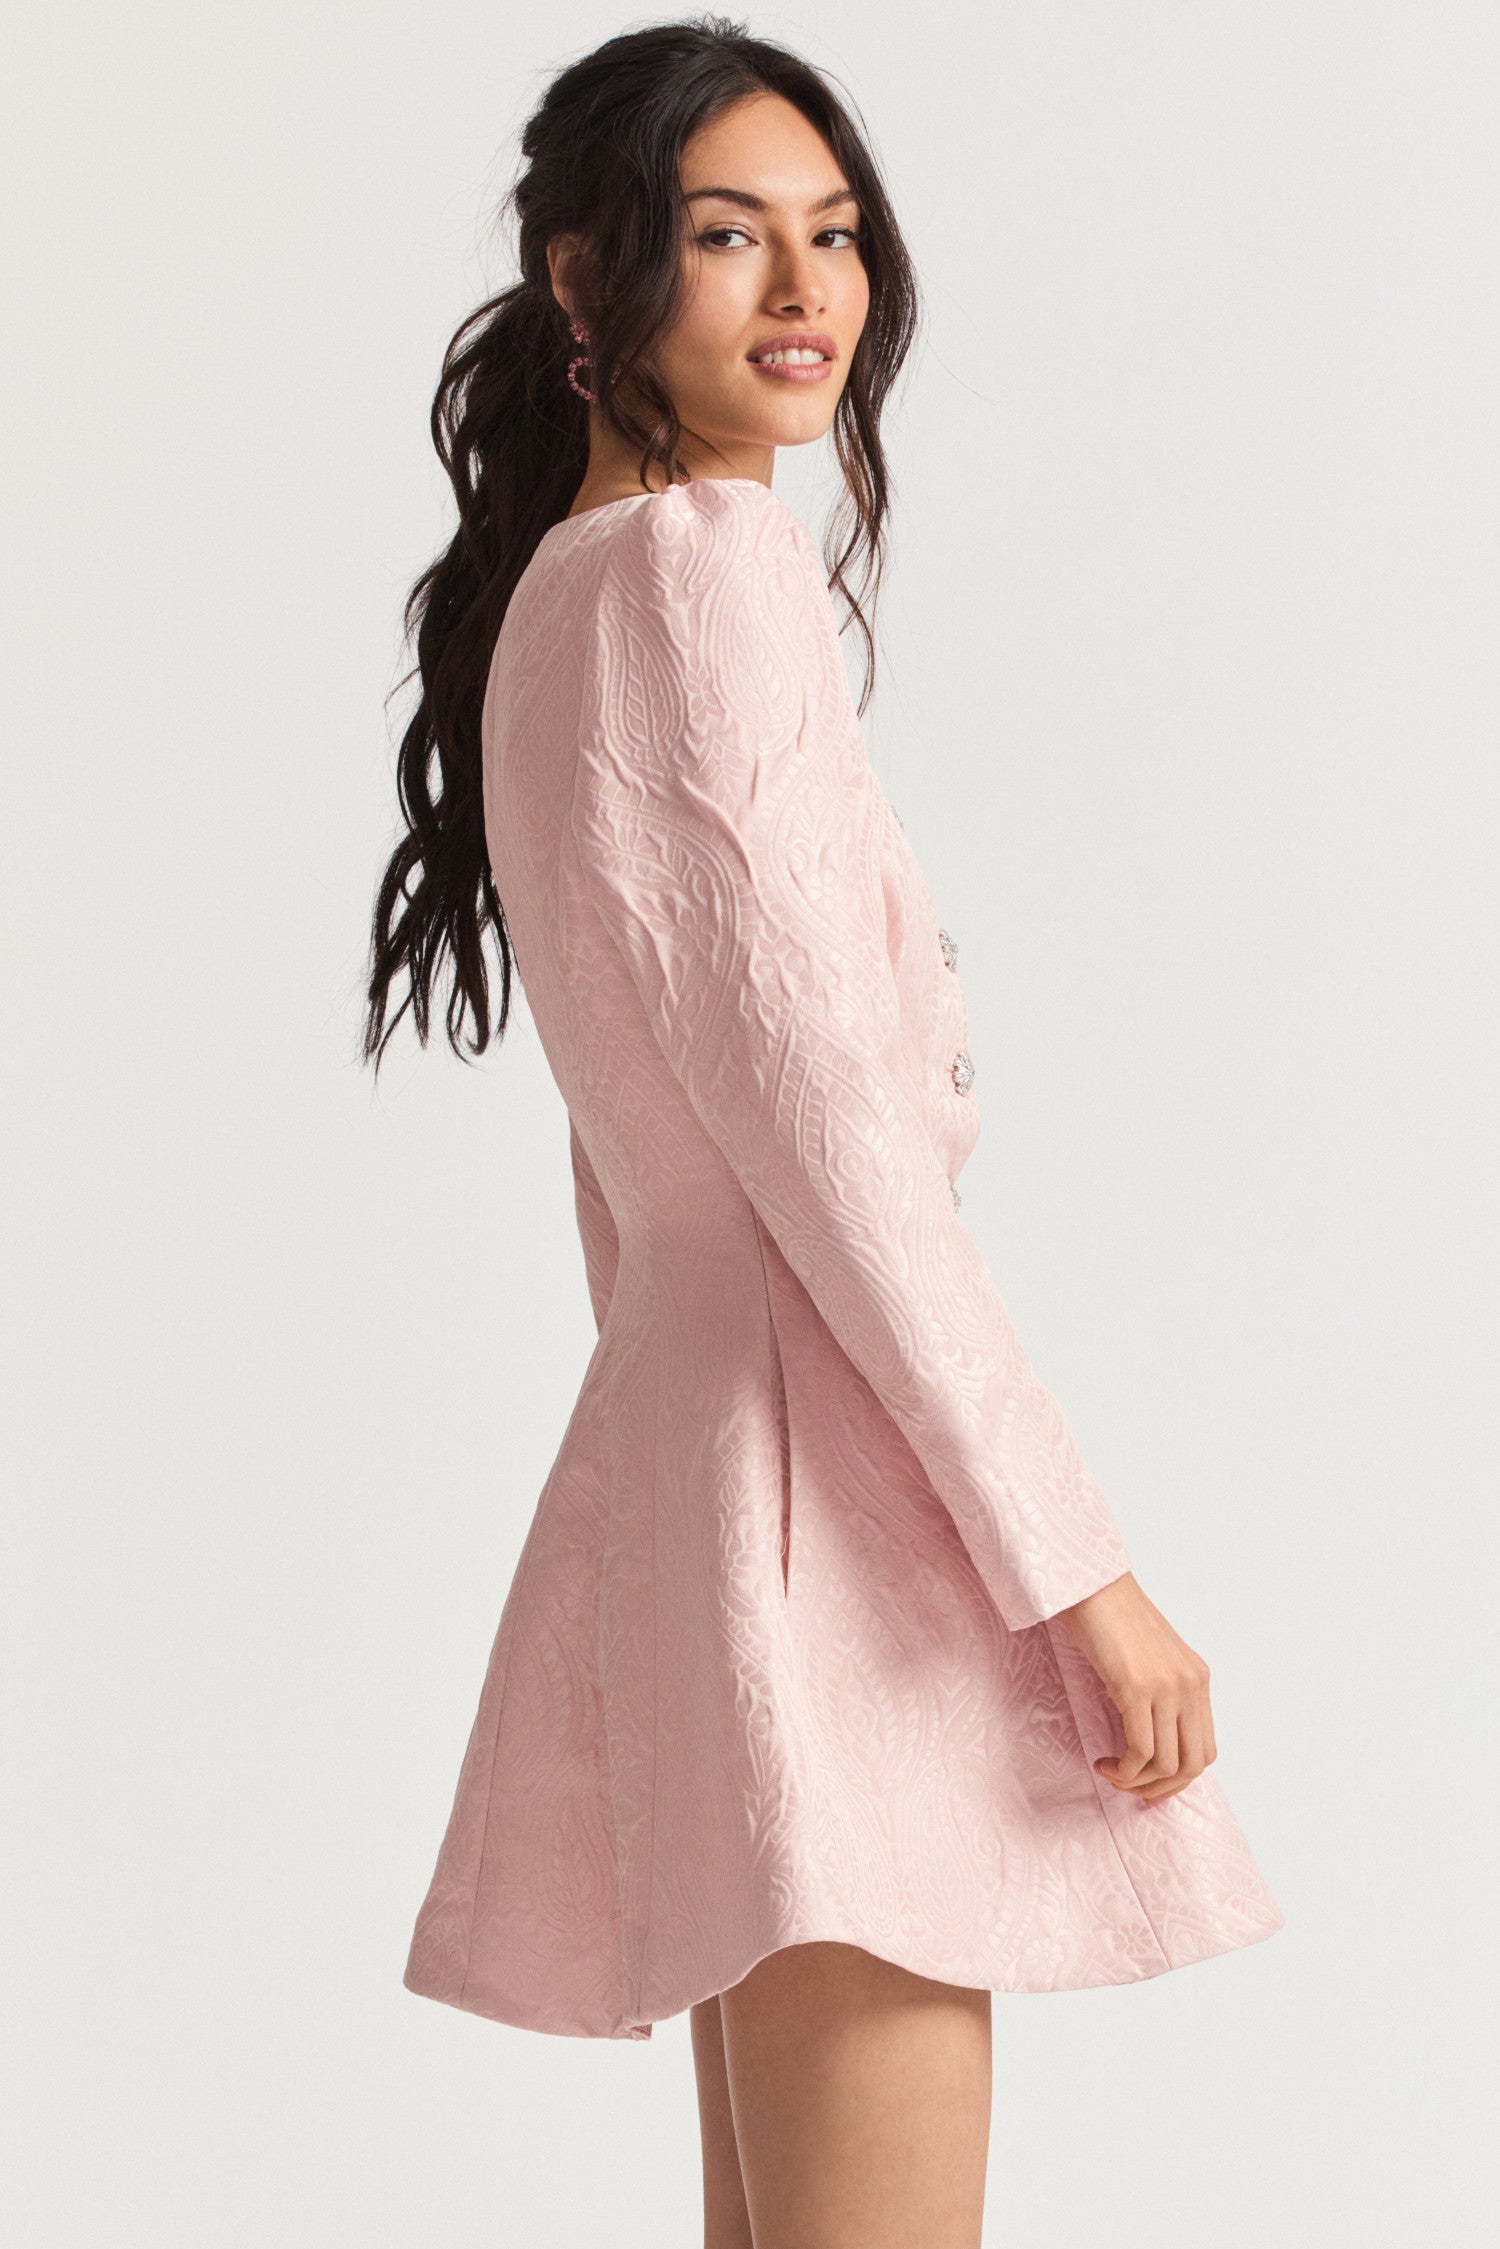 Pink mini jacket dress with paisley jacquard pattern and embellished crystal buttons, intricate body seaming to create a flawless fit.